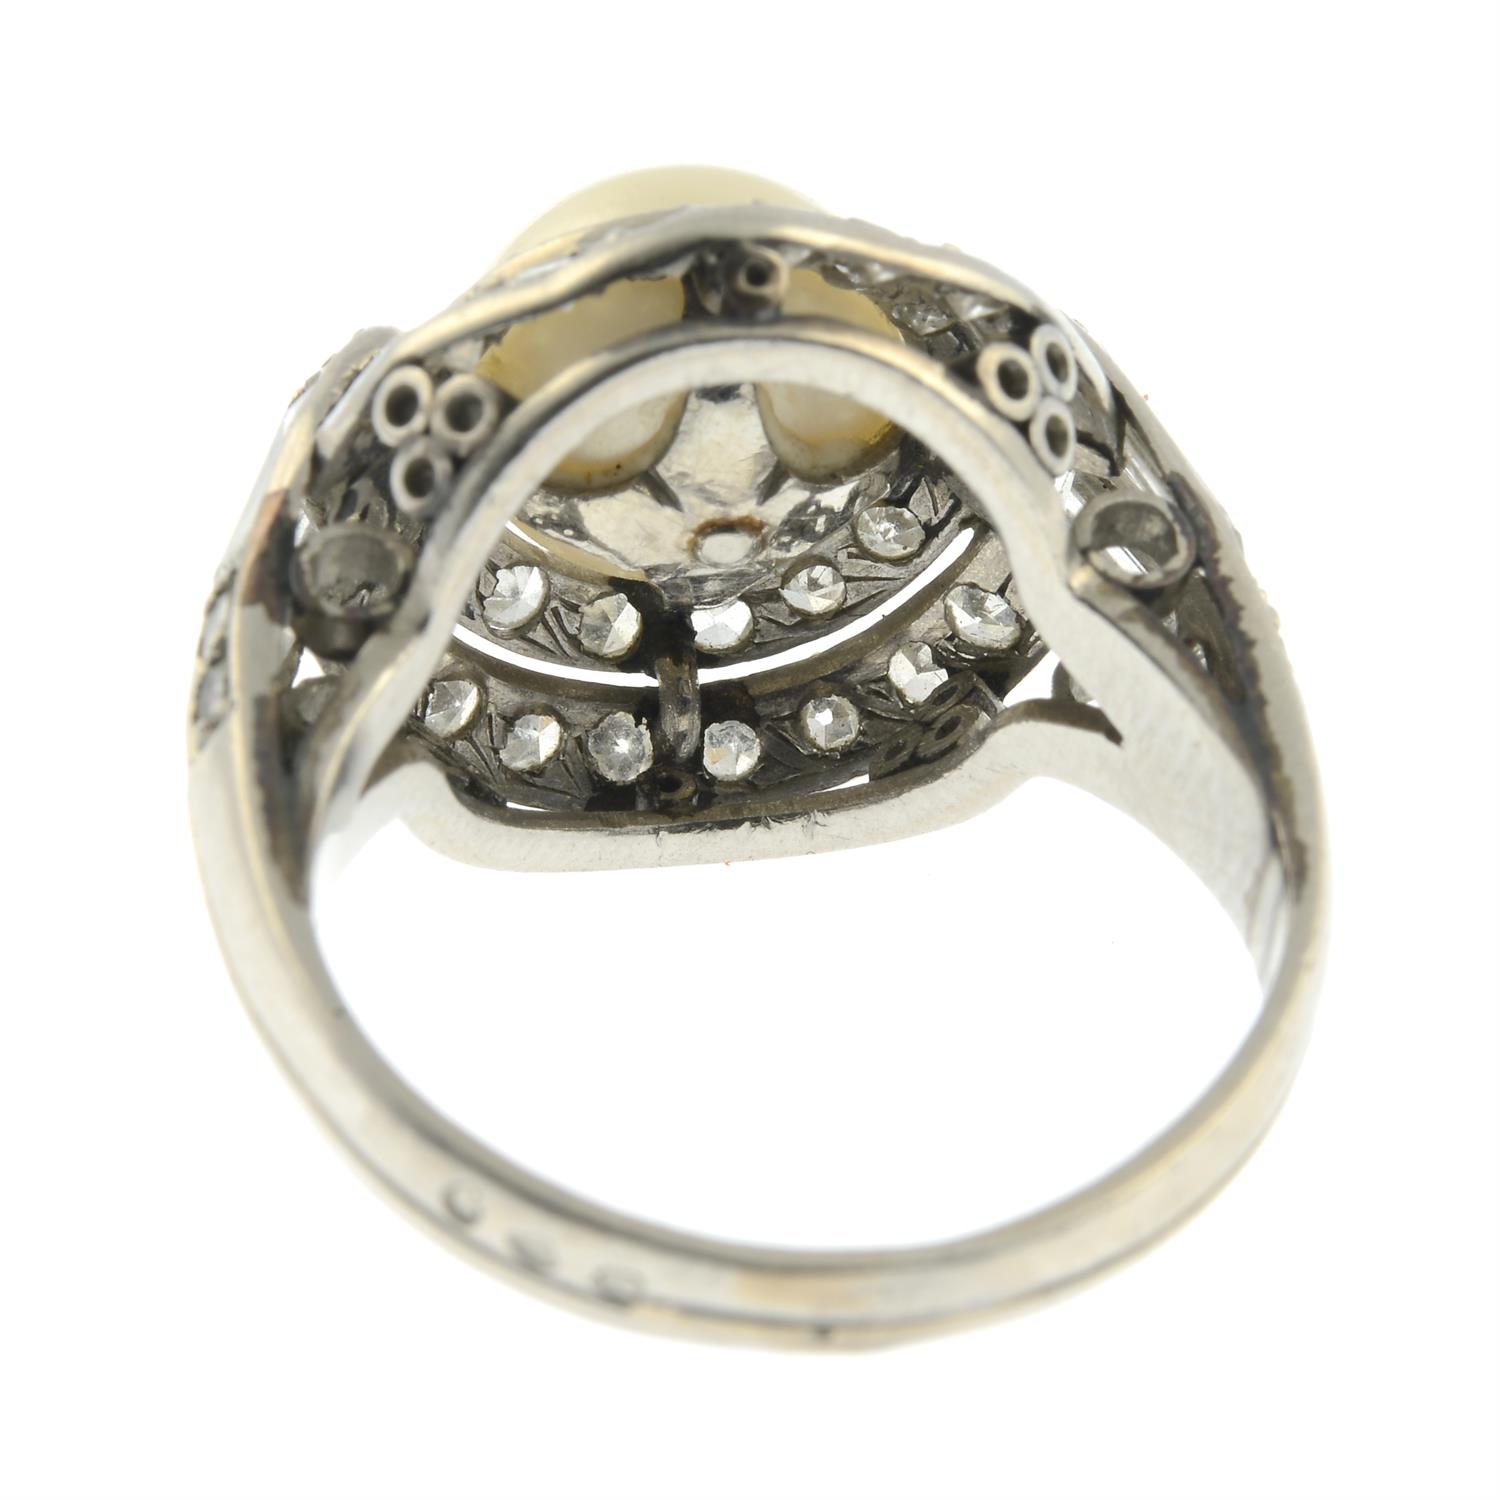 An early to mid 20th century platinum pearl, single and baguette-cut diamond dress ring. - Image 4 of 5